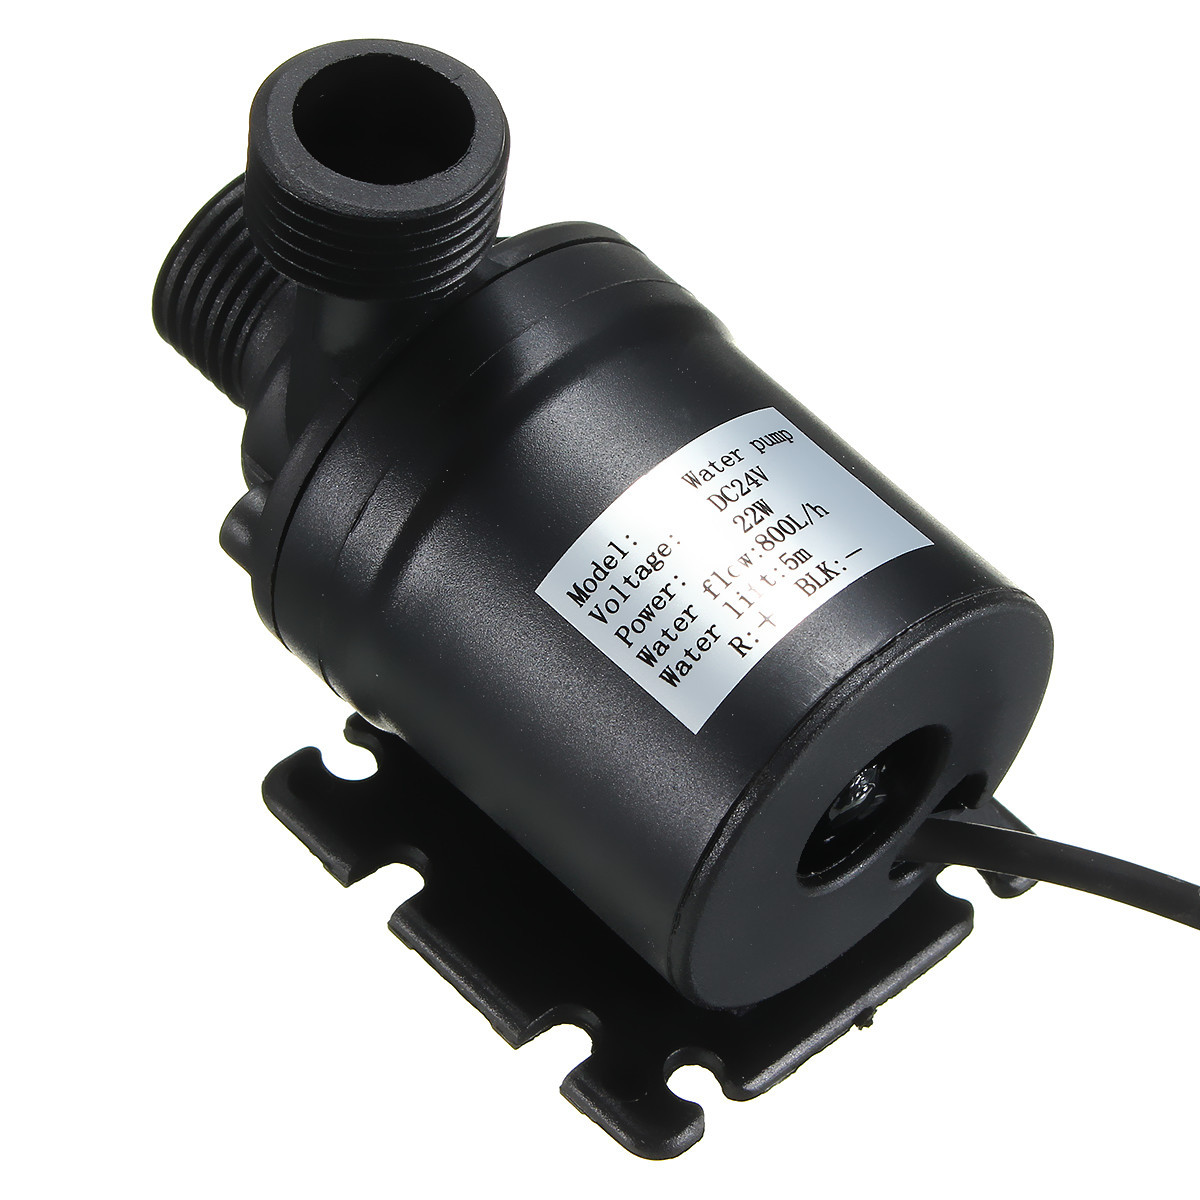 DC-24V-800LH-19W-5m-Lift-Mini-Quiet-Brushless-Motor-Submersible-Water-Pump-With-4mm-Threaded-Port-1100573-6